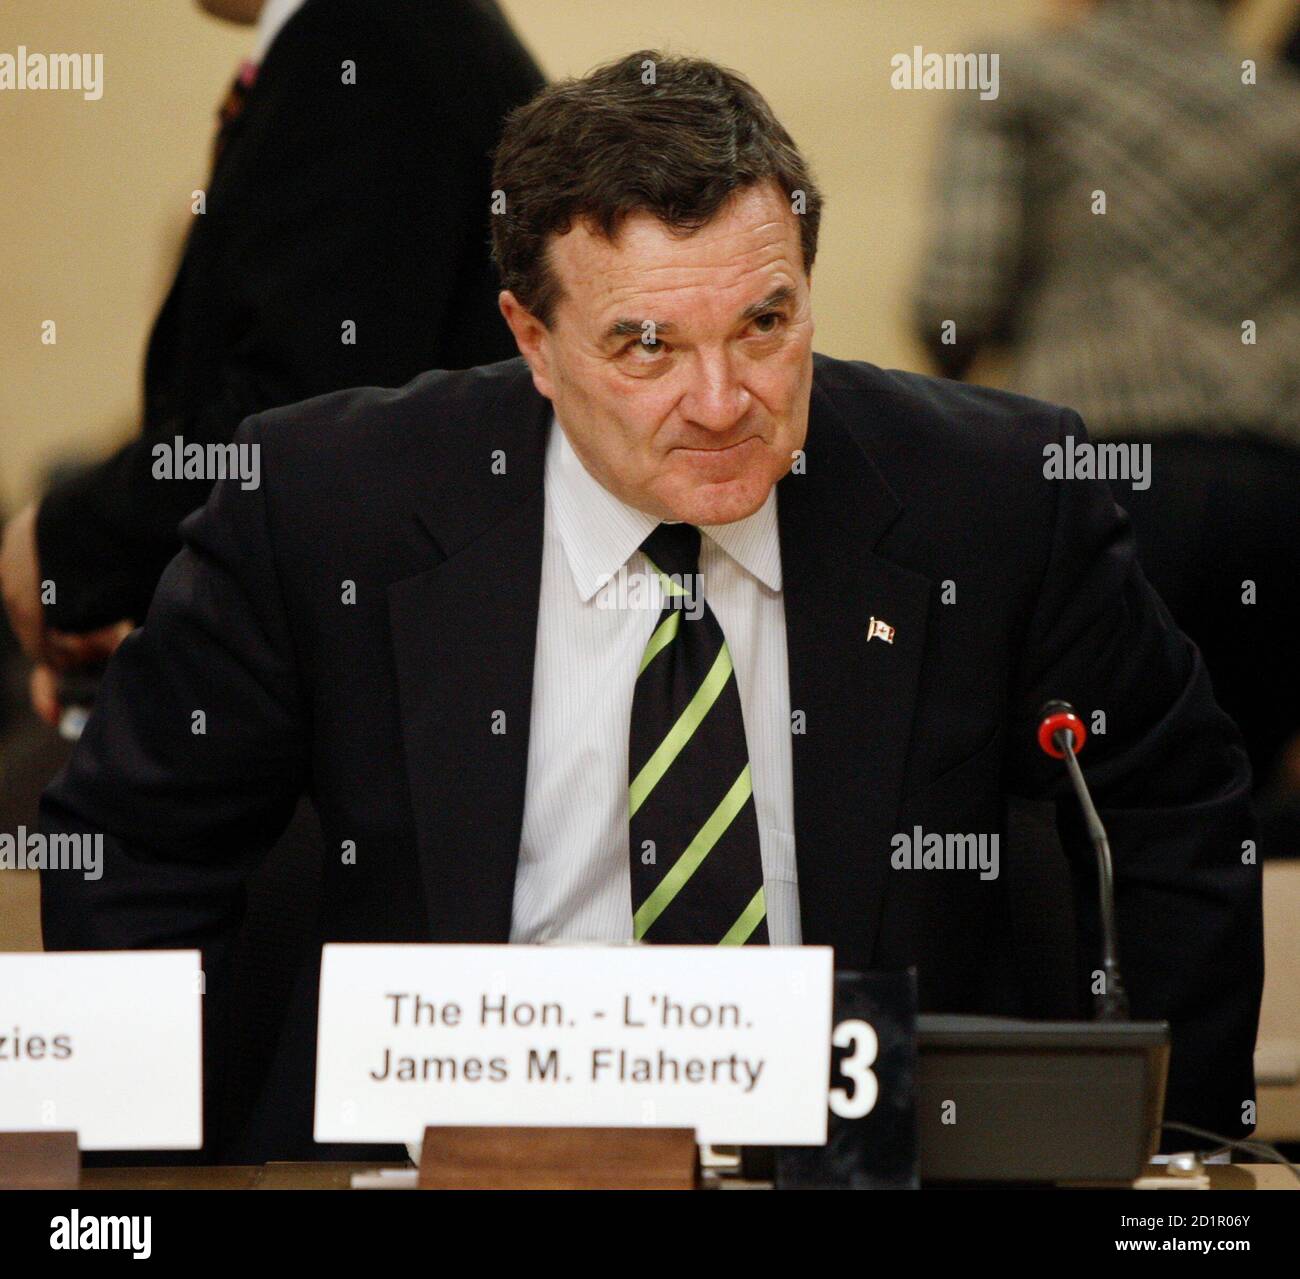 Canada's Finance Minister Jim Flaherty waits to testify before the Senate finance committee in Ottawa March 10, 2009. Canadian jobs data due out later this week will offer further evidence that the domestic economy is reeling from the global economic slowdown, Flaherty said on Tuesday.         REUTERS/Chris Wattie       (CANADA POLITICS BUSINESS) Stock Photo